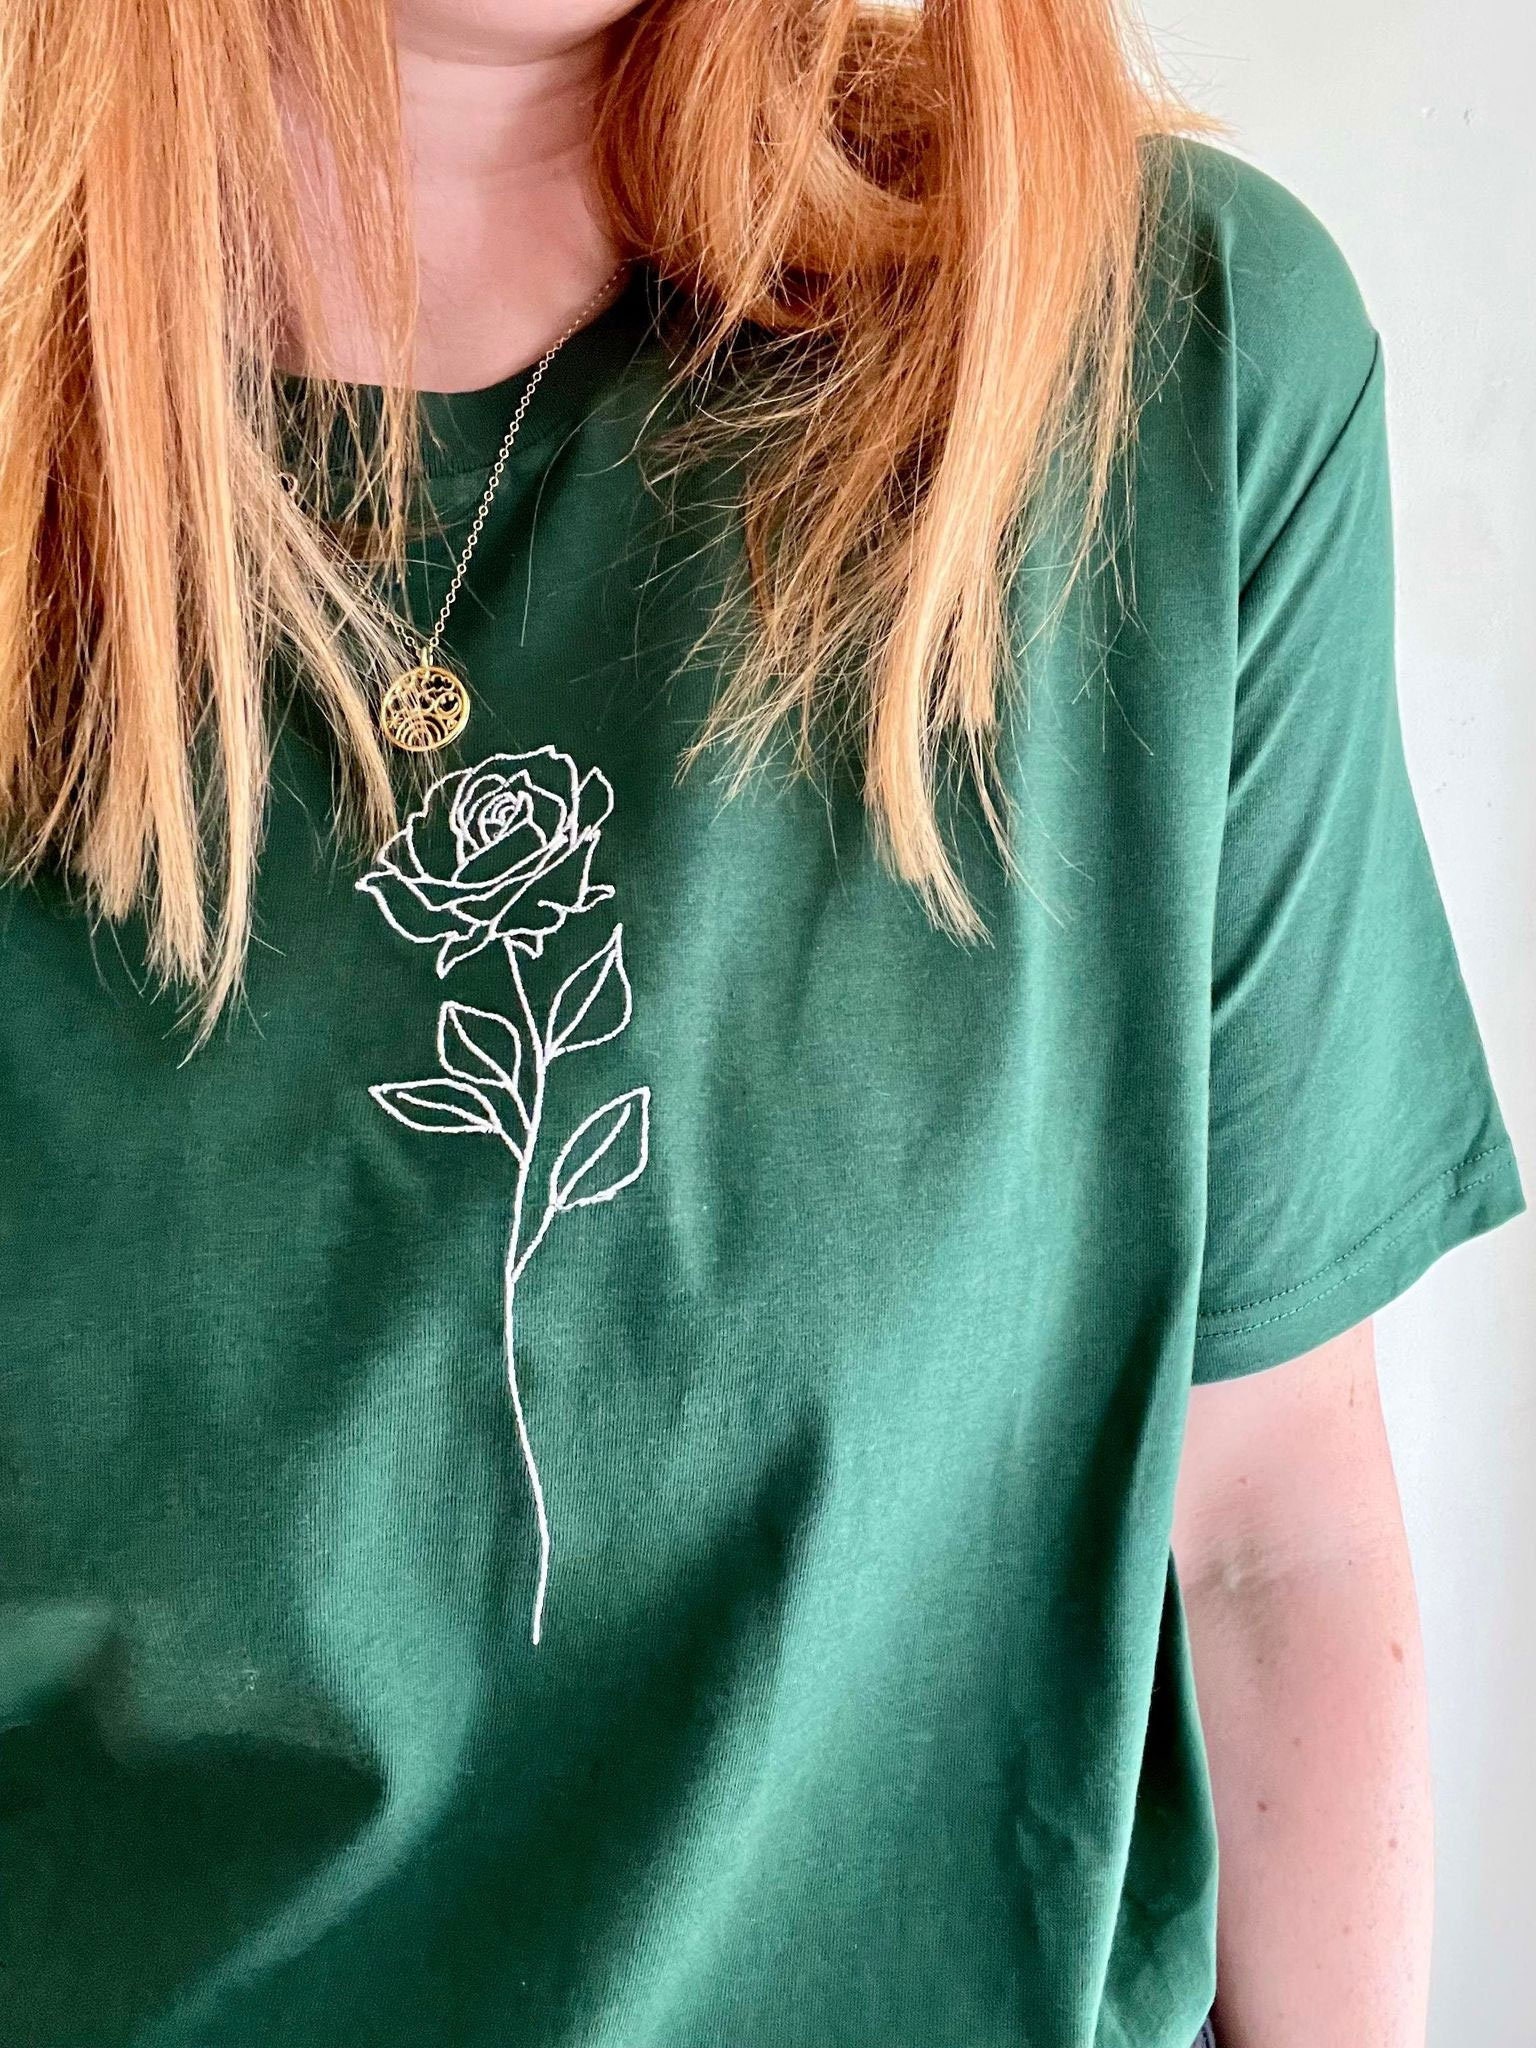 T-shirt Clothing Designs Embroidered Drawn Rose Etsy Soft - Single Sustainable Organic Unique Rose Top Hand